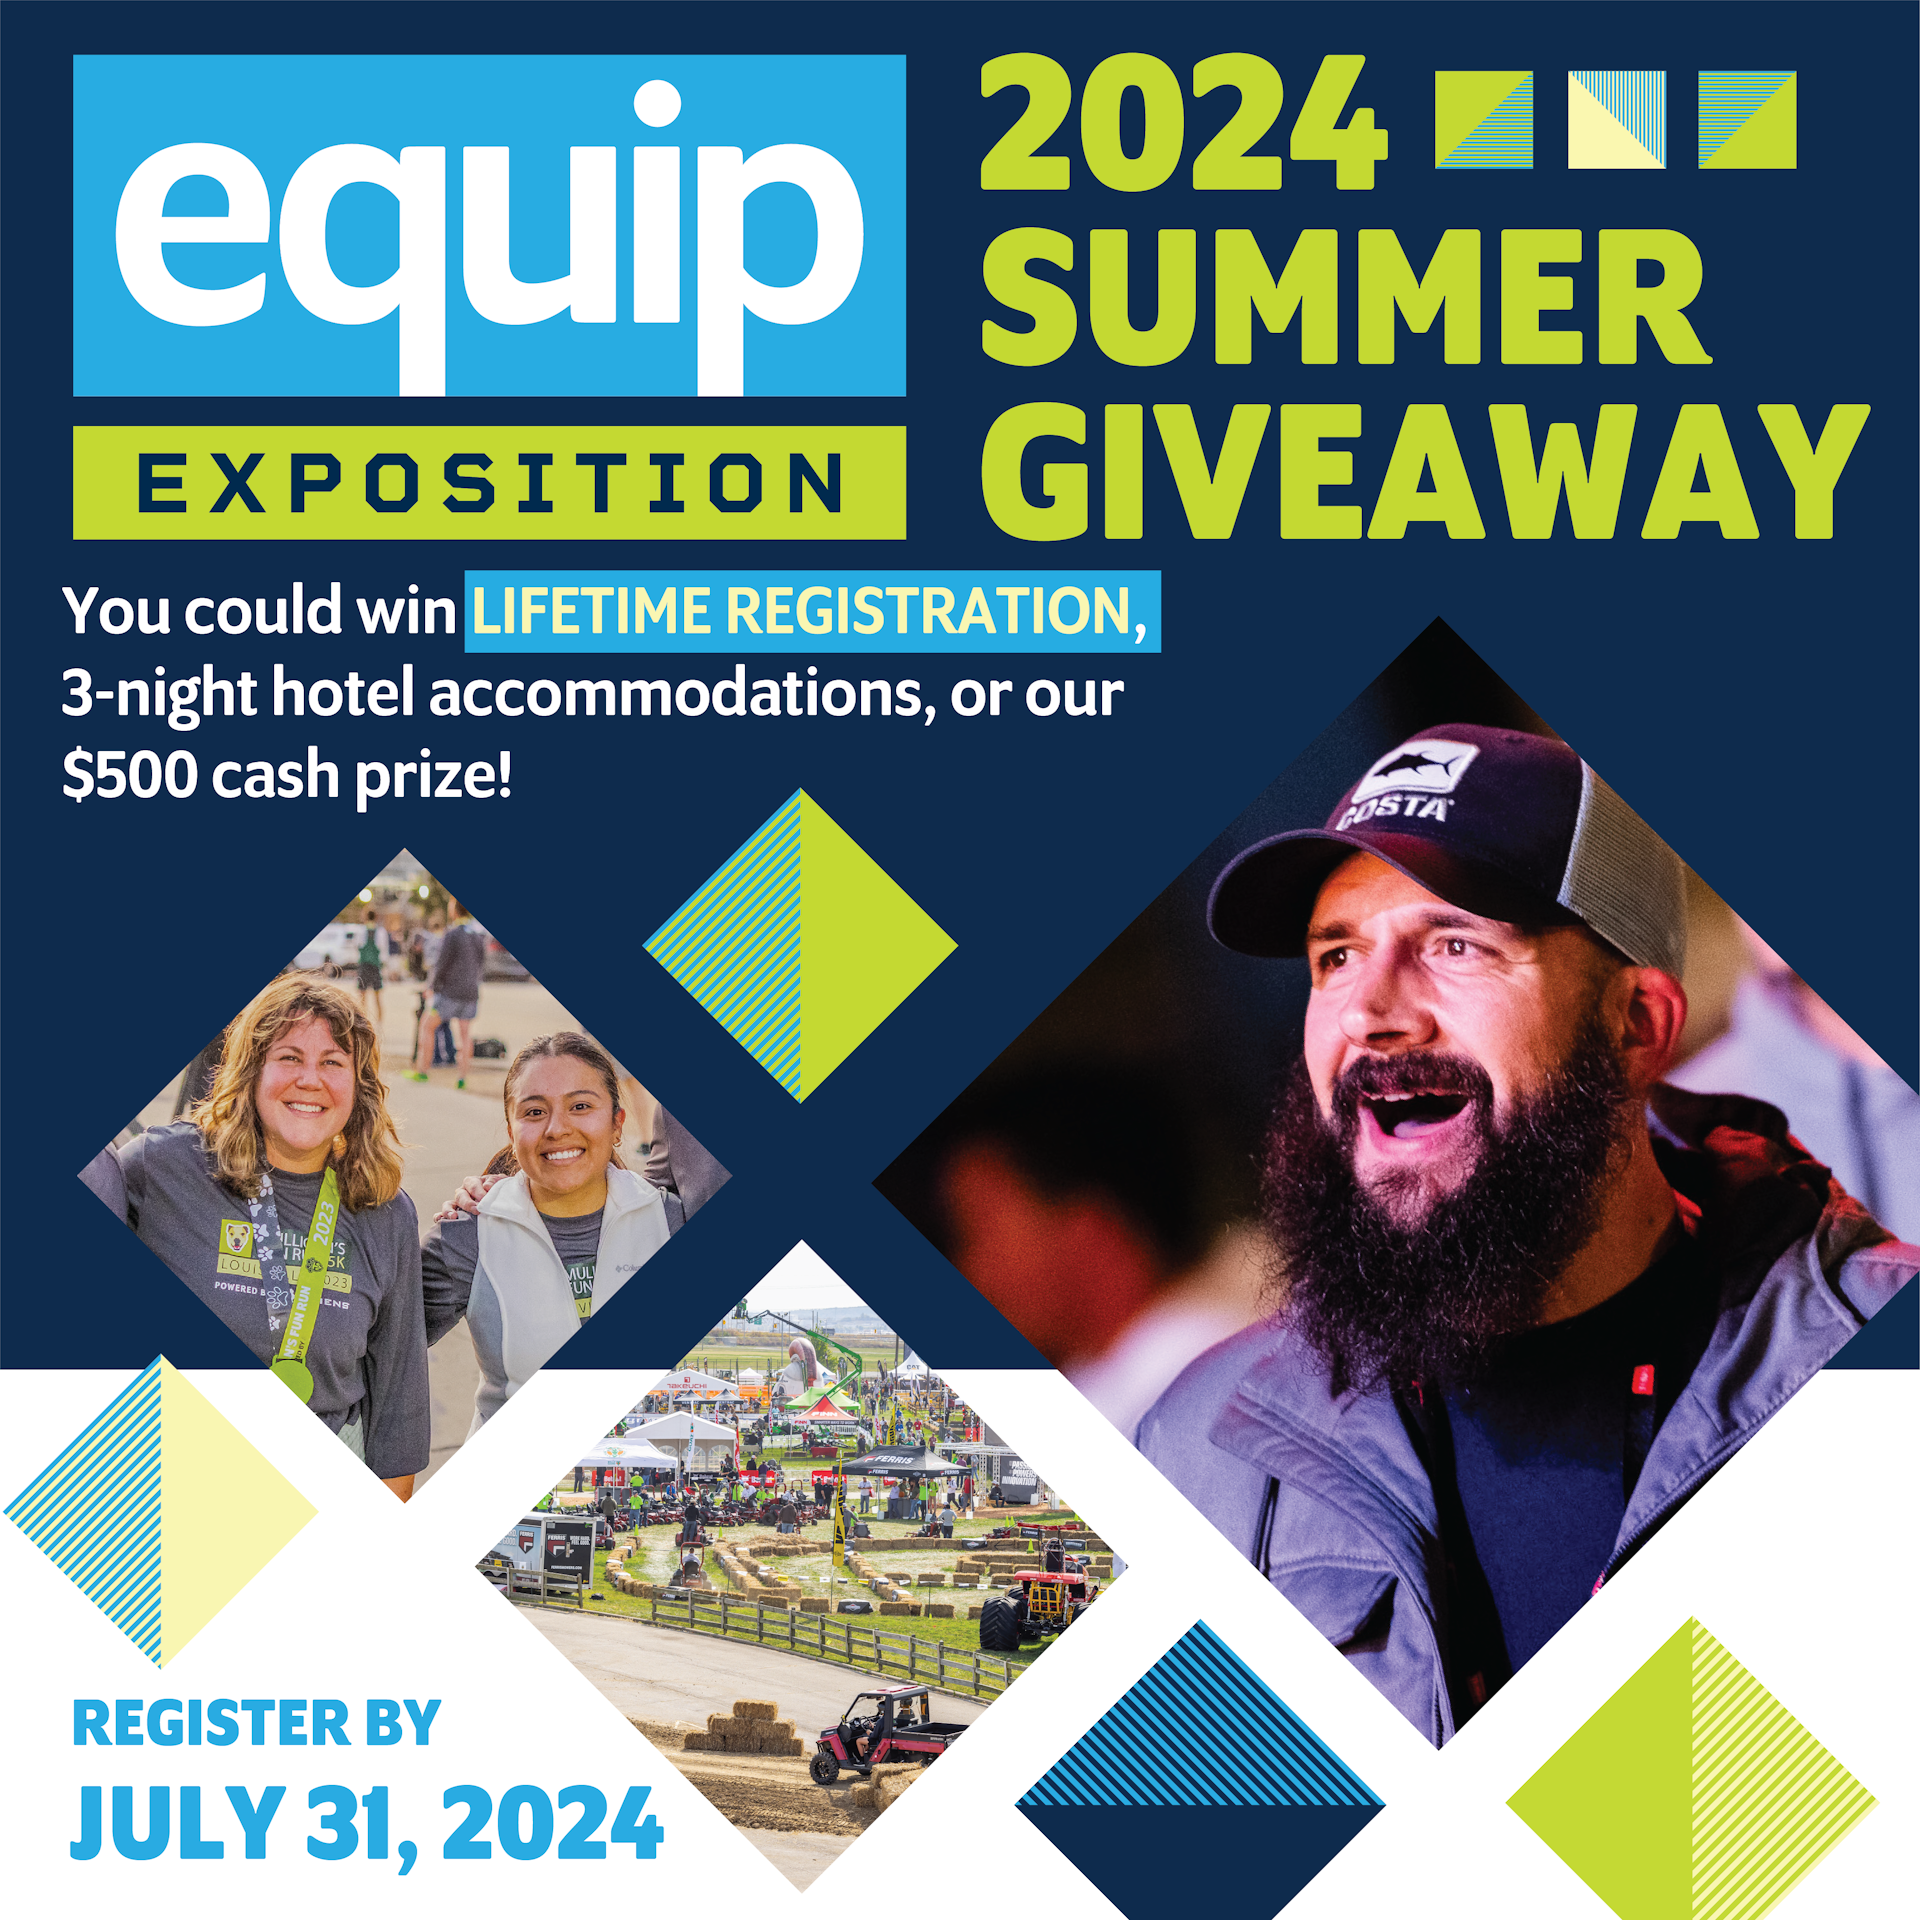 Equip Expo’s Summer Giveaway Offers a Chance for Lifetime Trade Show Registration, $500 Gift Card, Hotel Stay-f19ef689-420f-482f-a3cb-f8dd8a760aab